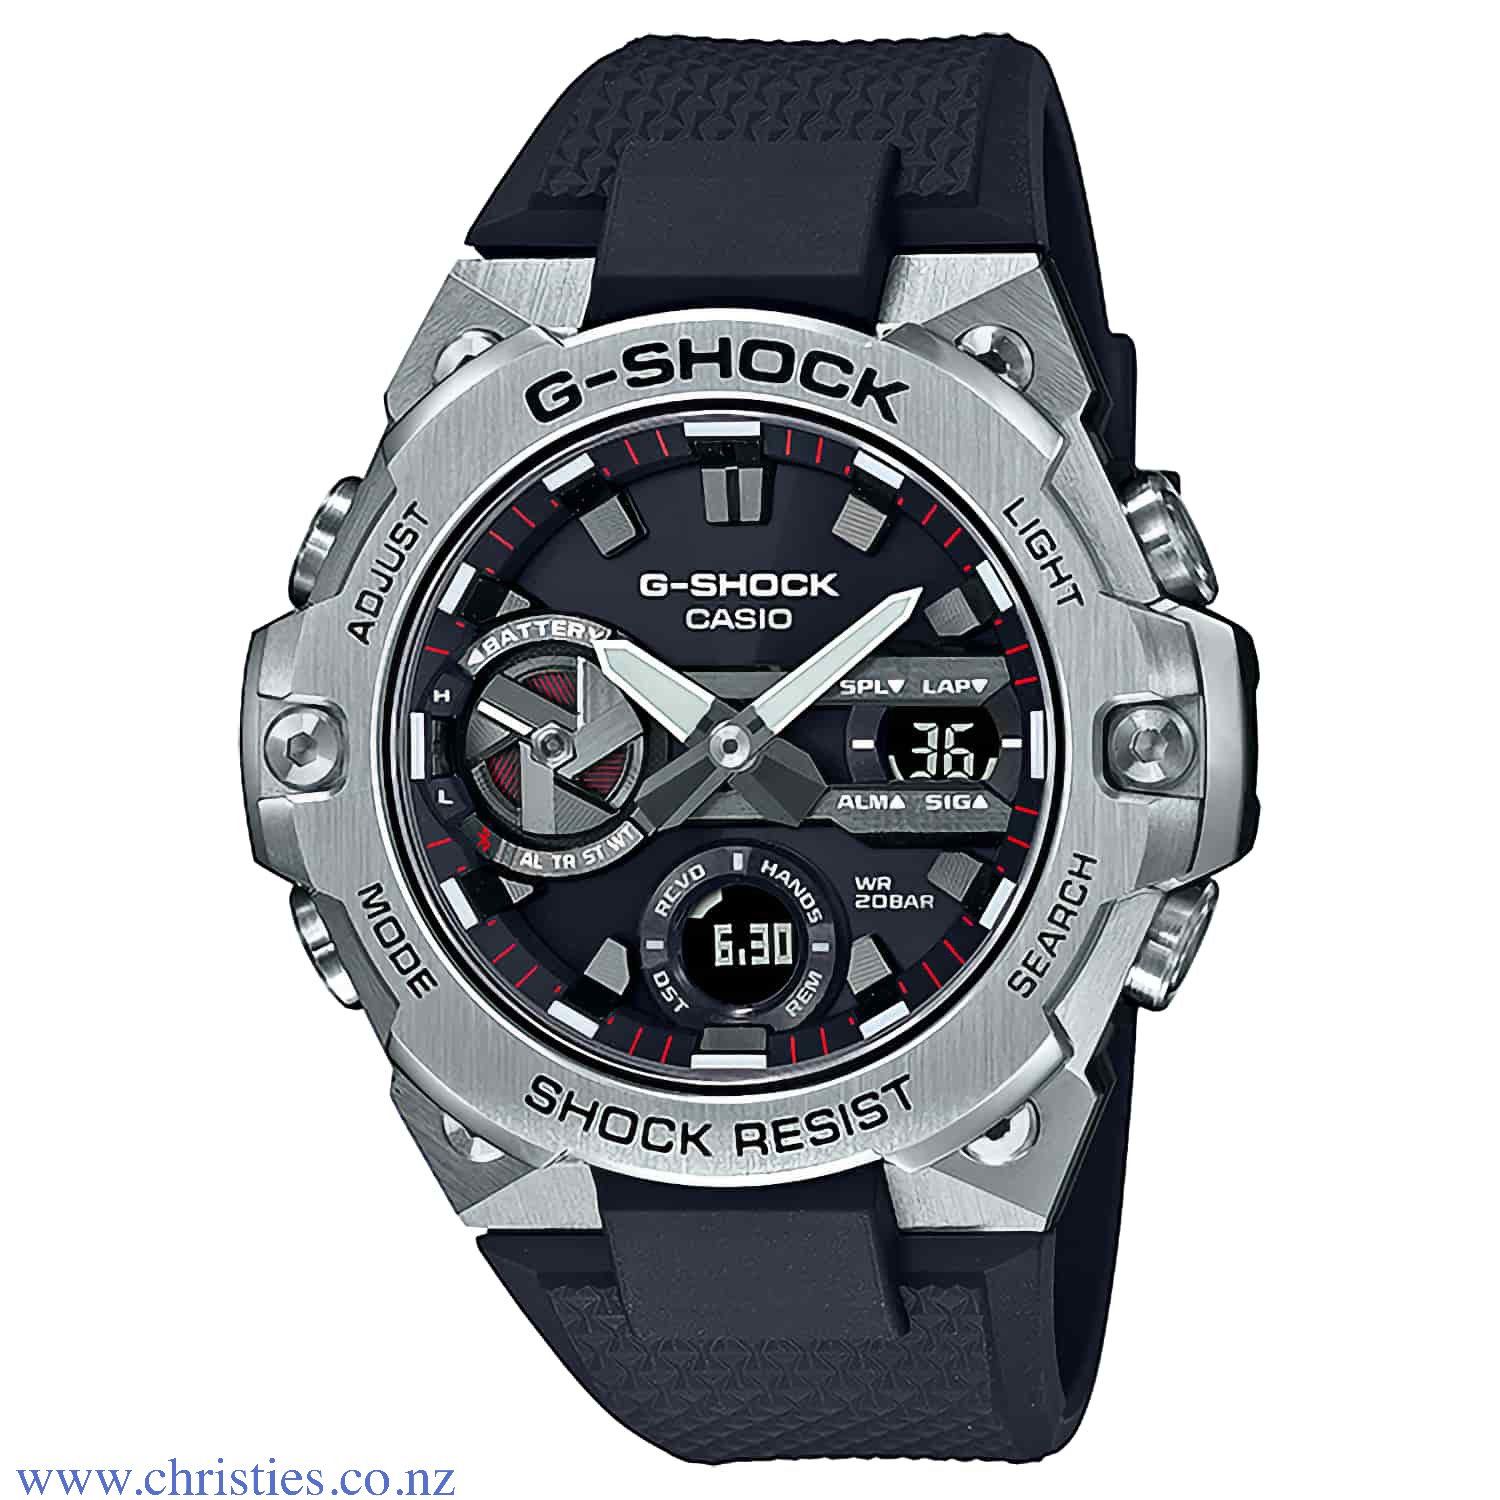 GSTB400-1A Casio G-Shock G-STEEL Watch. Introducing new colour variations to the lineup of slim G-STEEL GST-B400 models with new, improved designs made possible by a thin module and carbon core guard structure. There is a standard model in this lineup, th